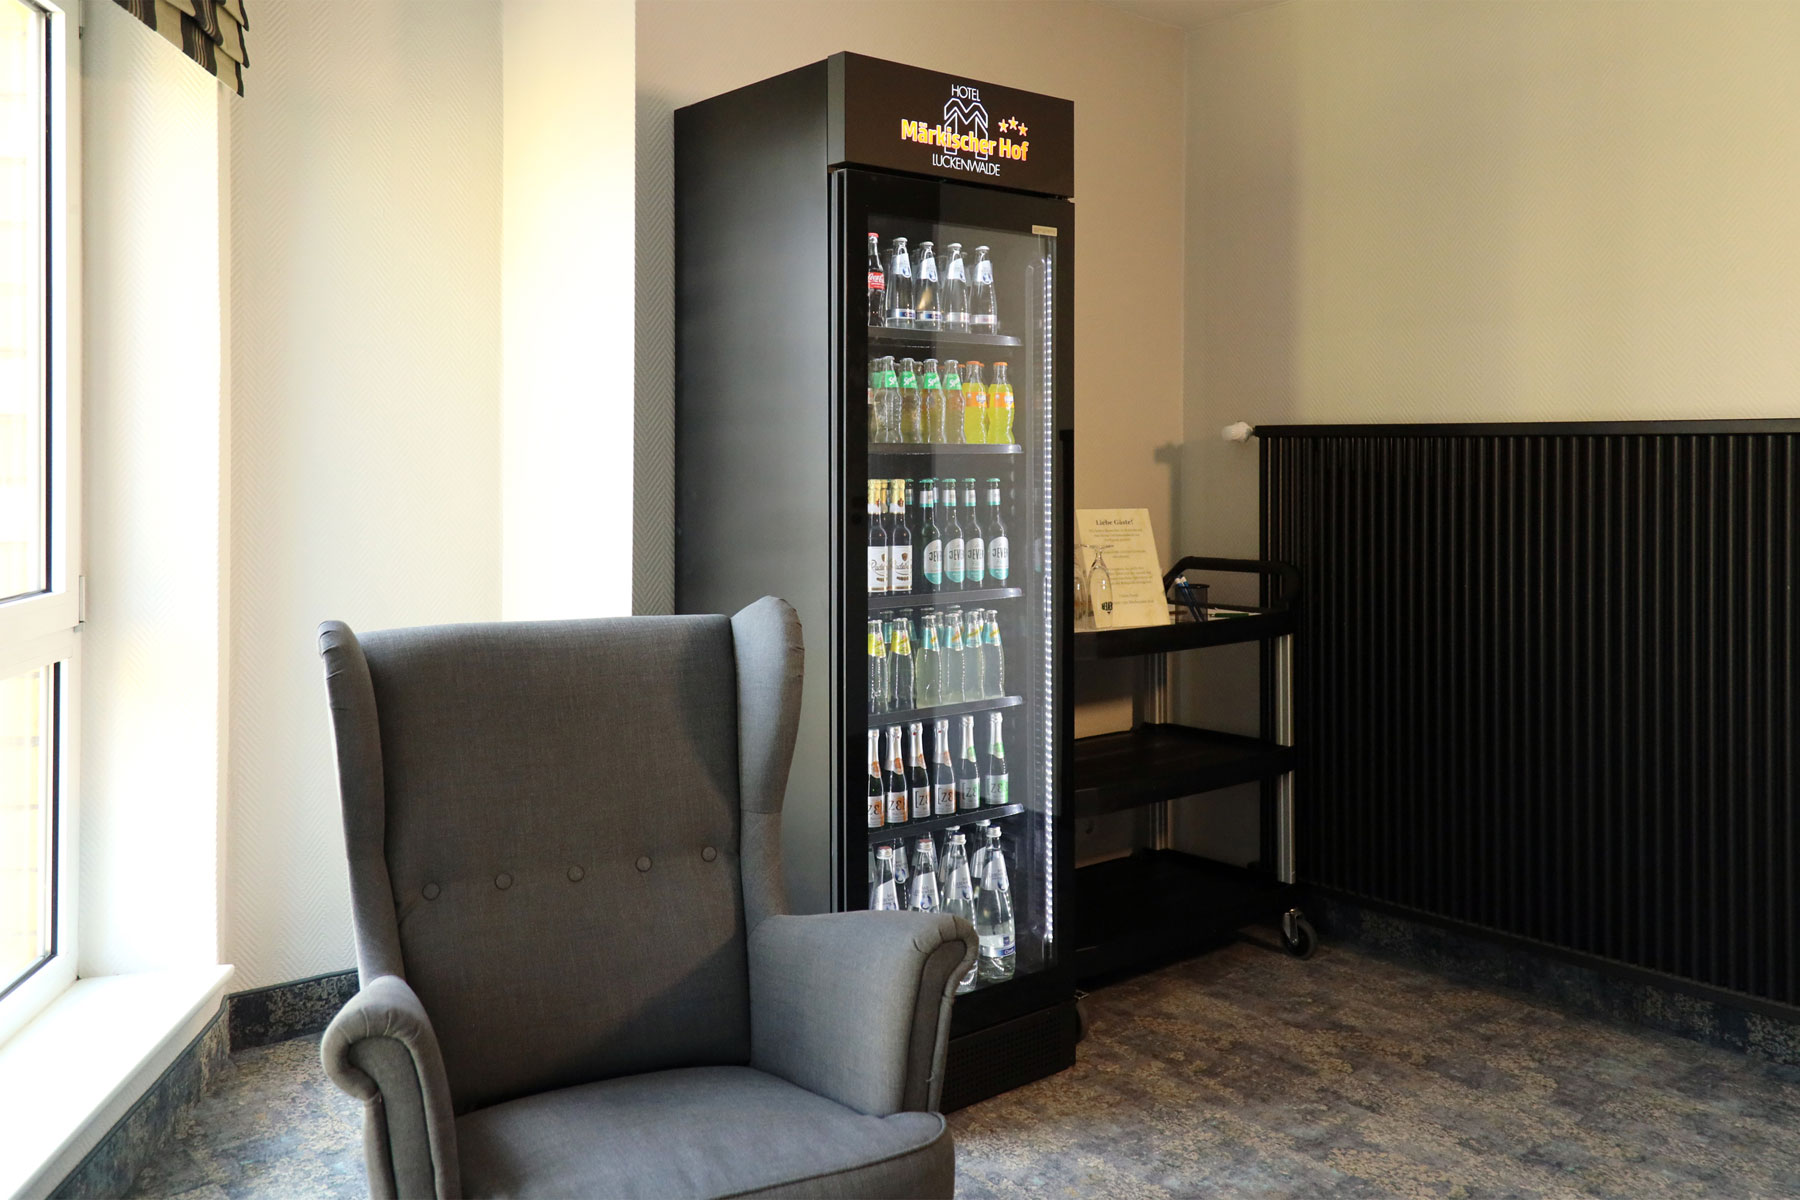 You are currently viewing Maxi statt Minibar